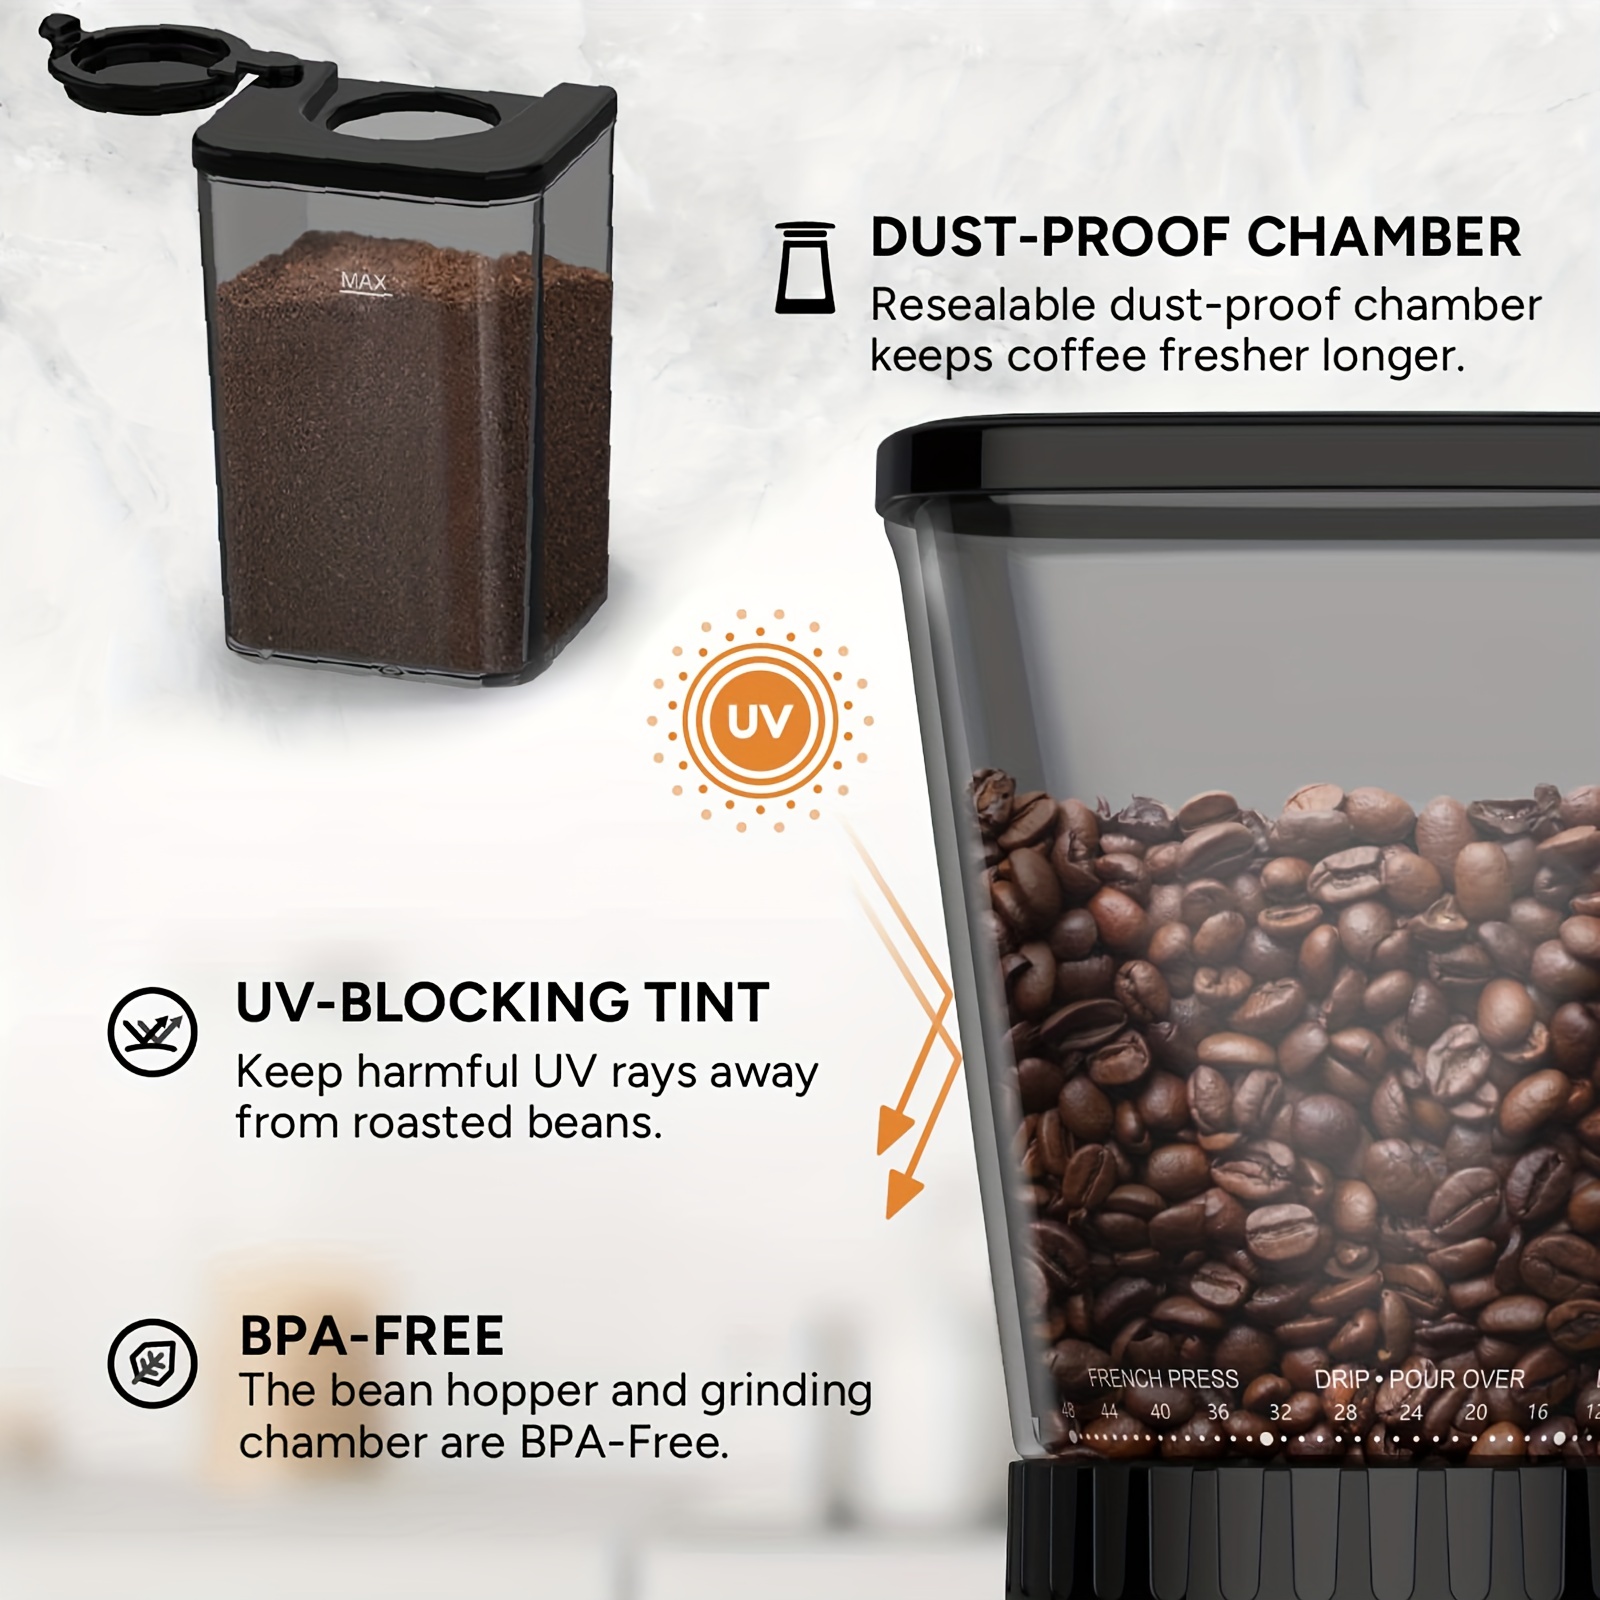 IAGREEA Anti Static Conical Burr Coffee Grinder With 48 Precise Settings, Adjustable  Burr Mill Coffee Bean Grinder For 2 12 Cups, With Precision Electronic  Timer, Black From Juulpod, $46.28